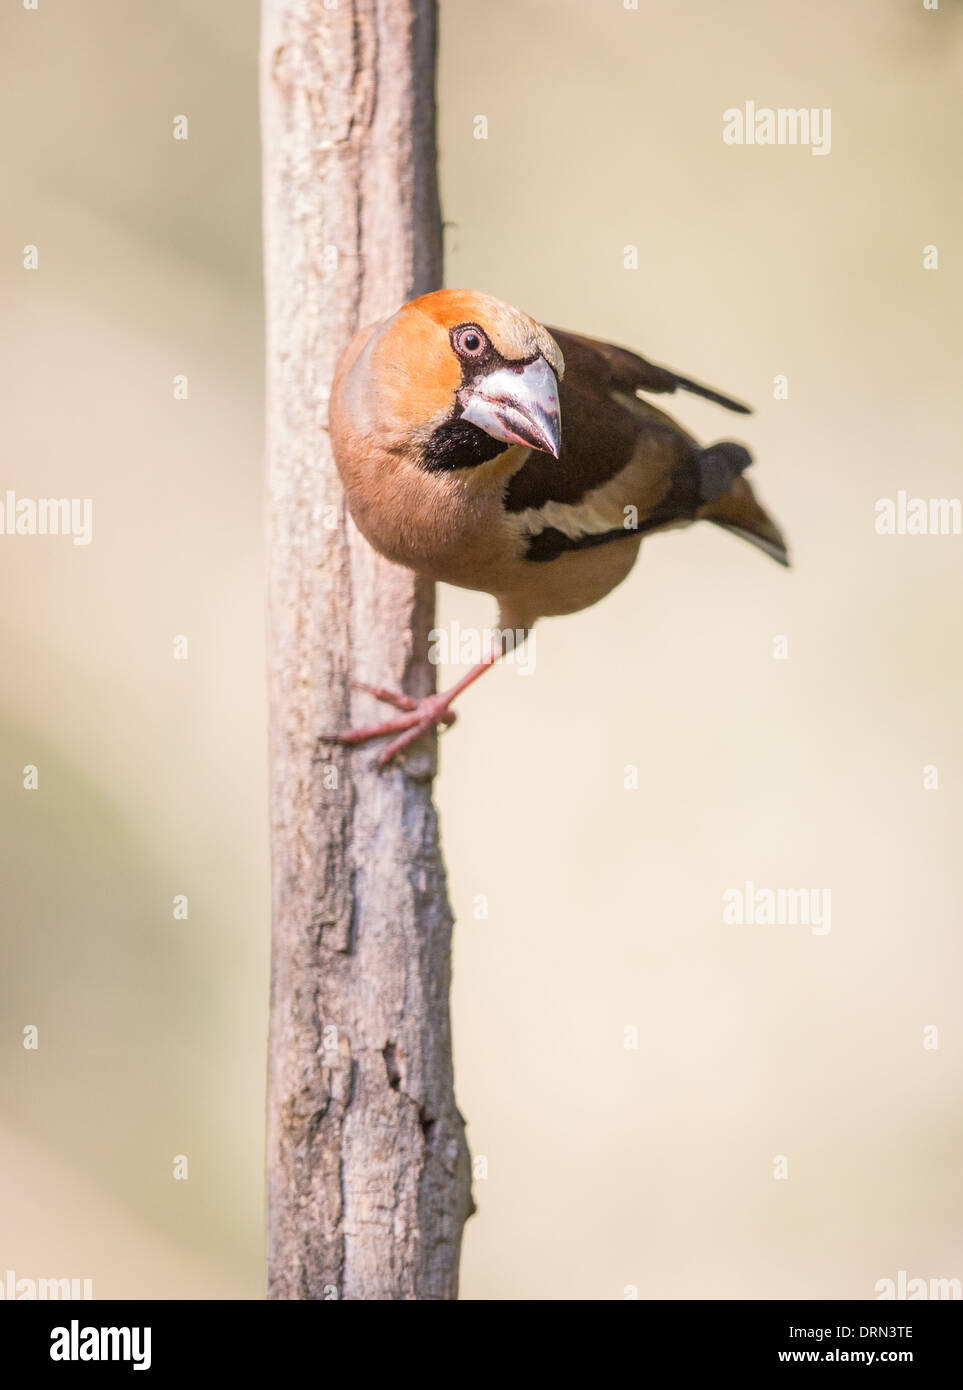 Adult Hawfinch (Coccothraustes coccothraustes) clinging to an unidentified branch Stock Photo